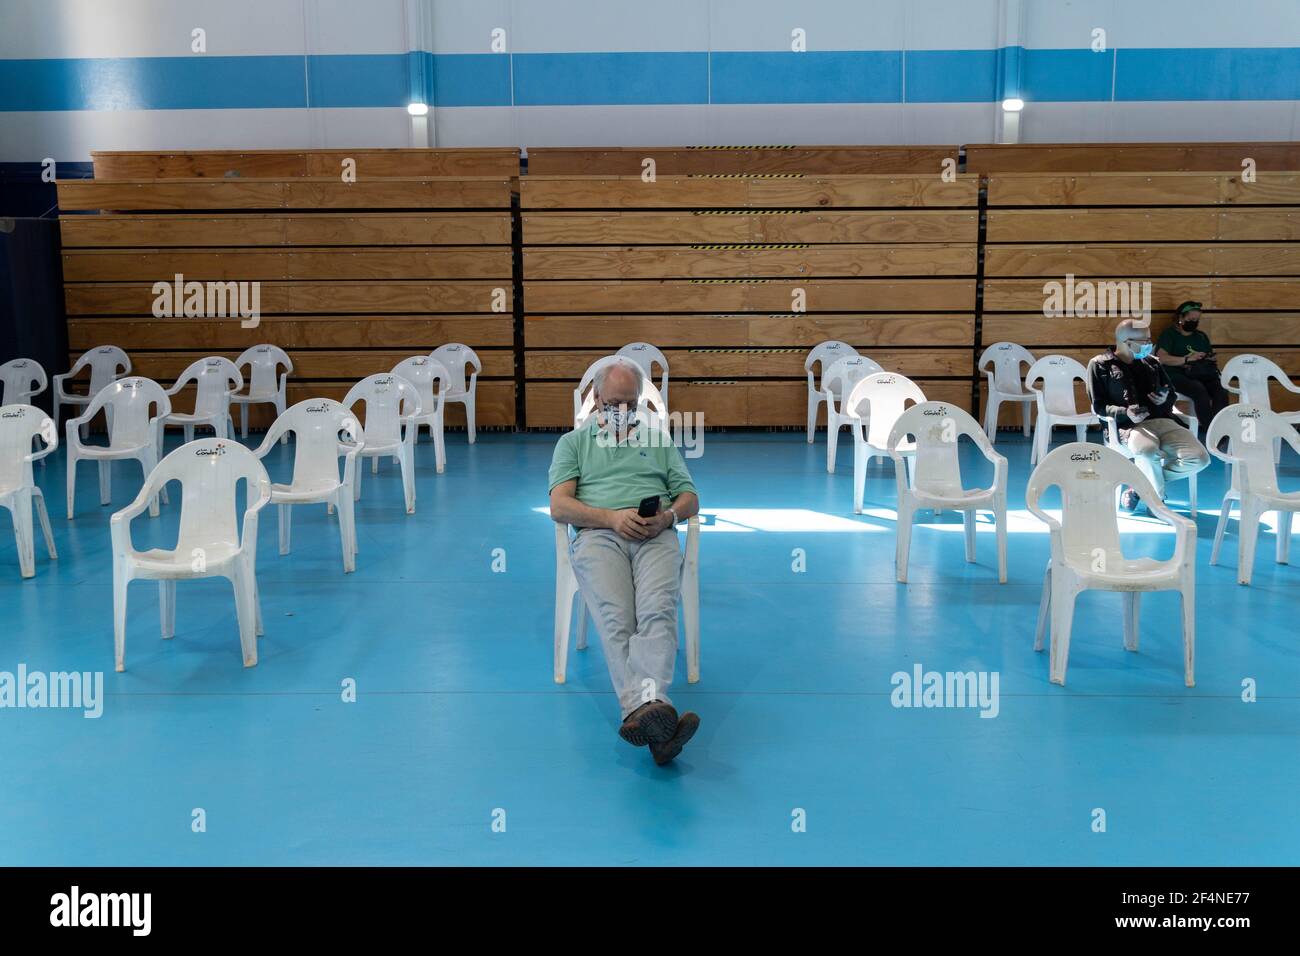 Santiago, Metropolitana, Chile. 22nd Mar, 2021. A man waits to receive the dose of the Sinovac or Pfizer vaccine, in a municipal stadium transformed into a vaccination center against covid in Santiago, Chile. Credit: Matias Basualdo/ZUMA Wire/Alamy Live News Stock Photo